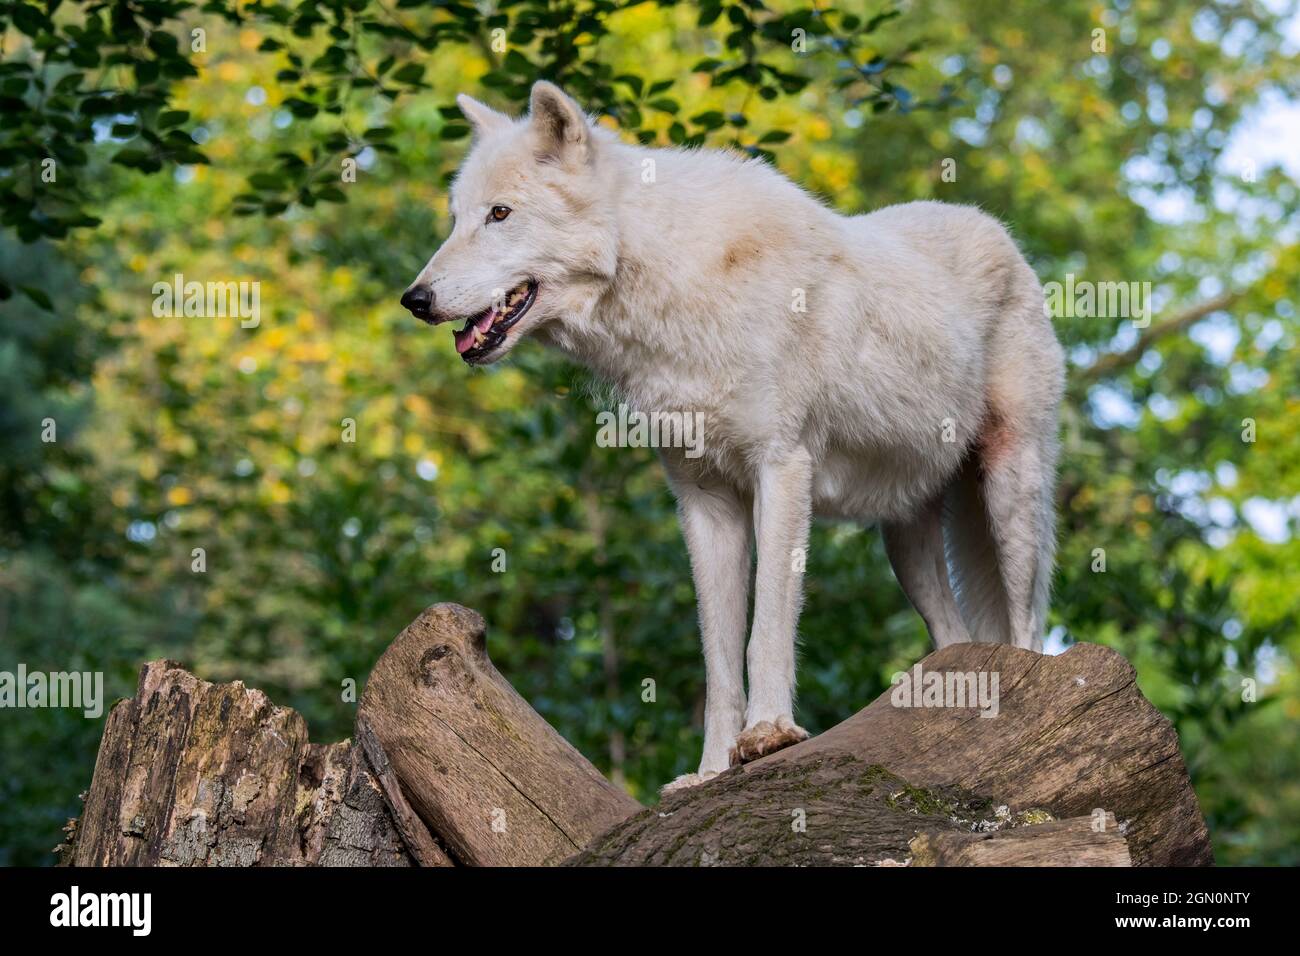 Hudson Bay wolf / Arctic wolf (Canis lupus hudsonicus) white wolf native to Canada Stock Photo